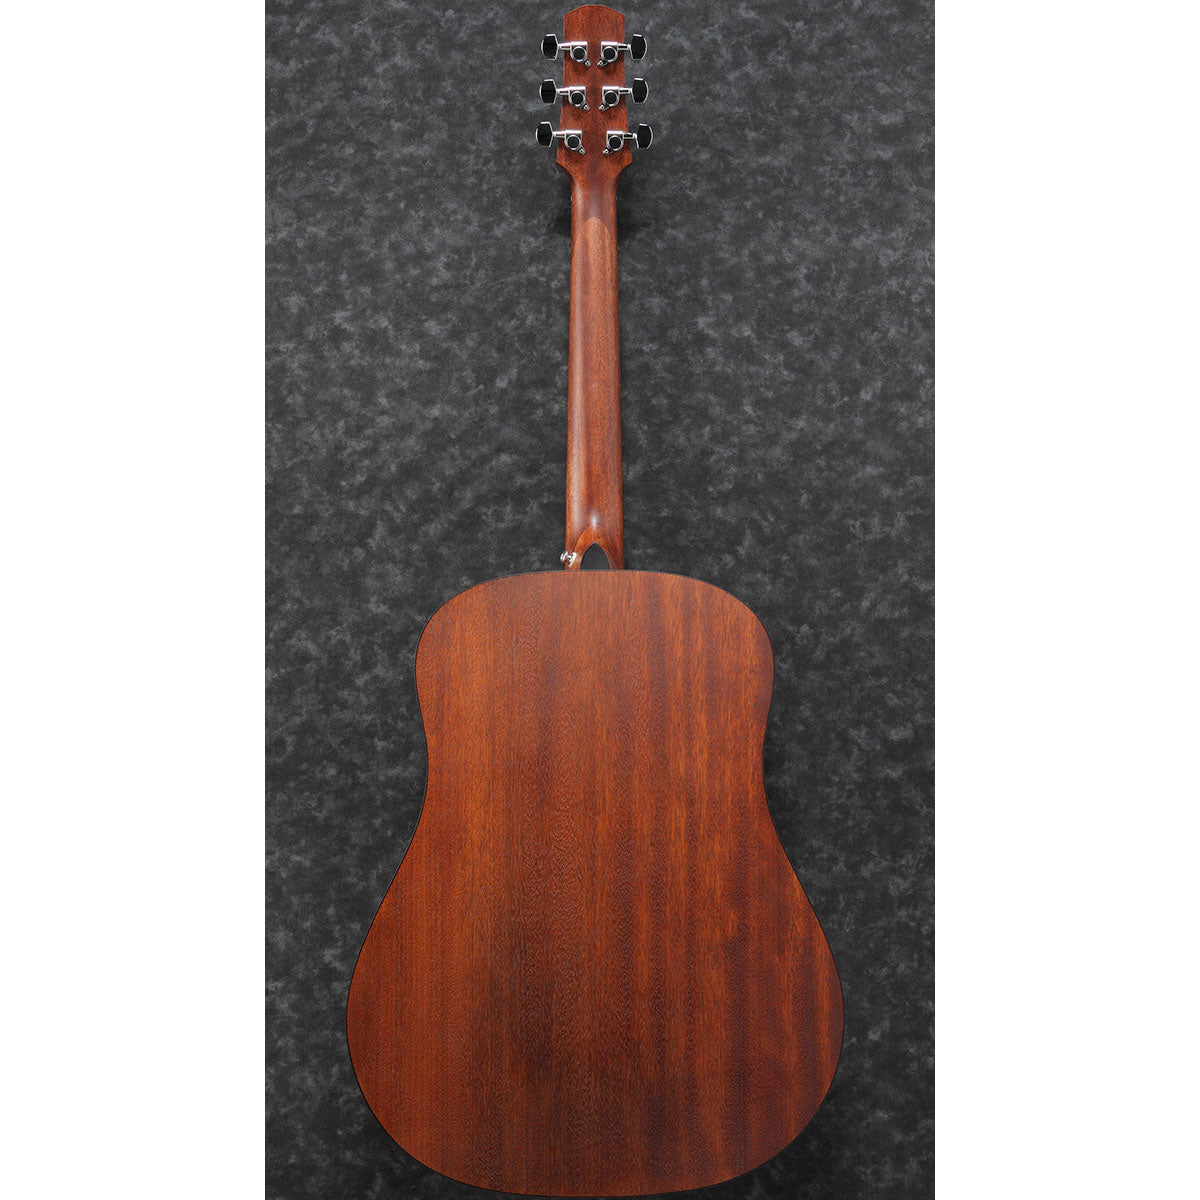 Back view of Ibanez AAD100 Acoustic Guitar - Open Pore Natural